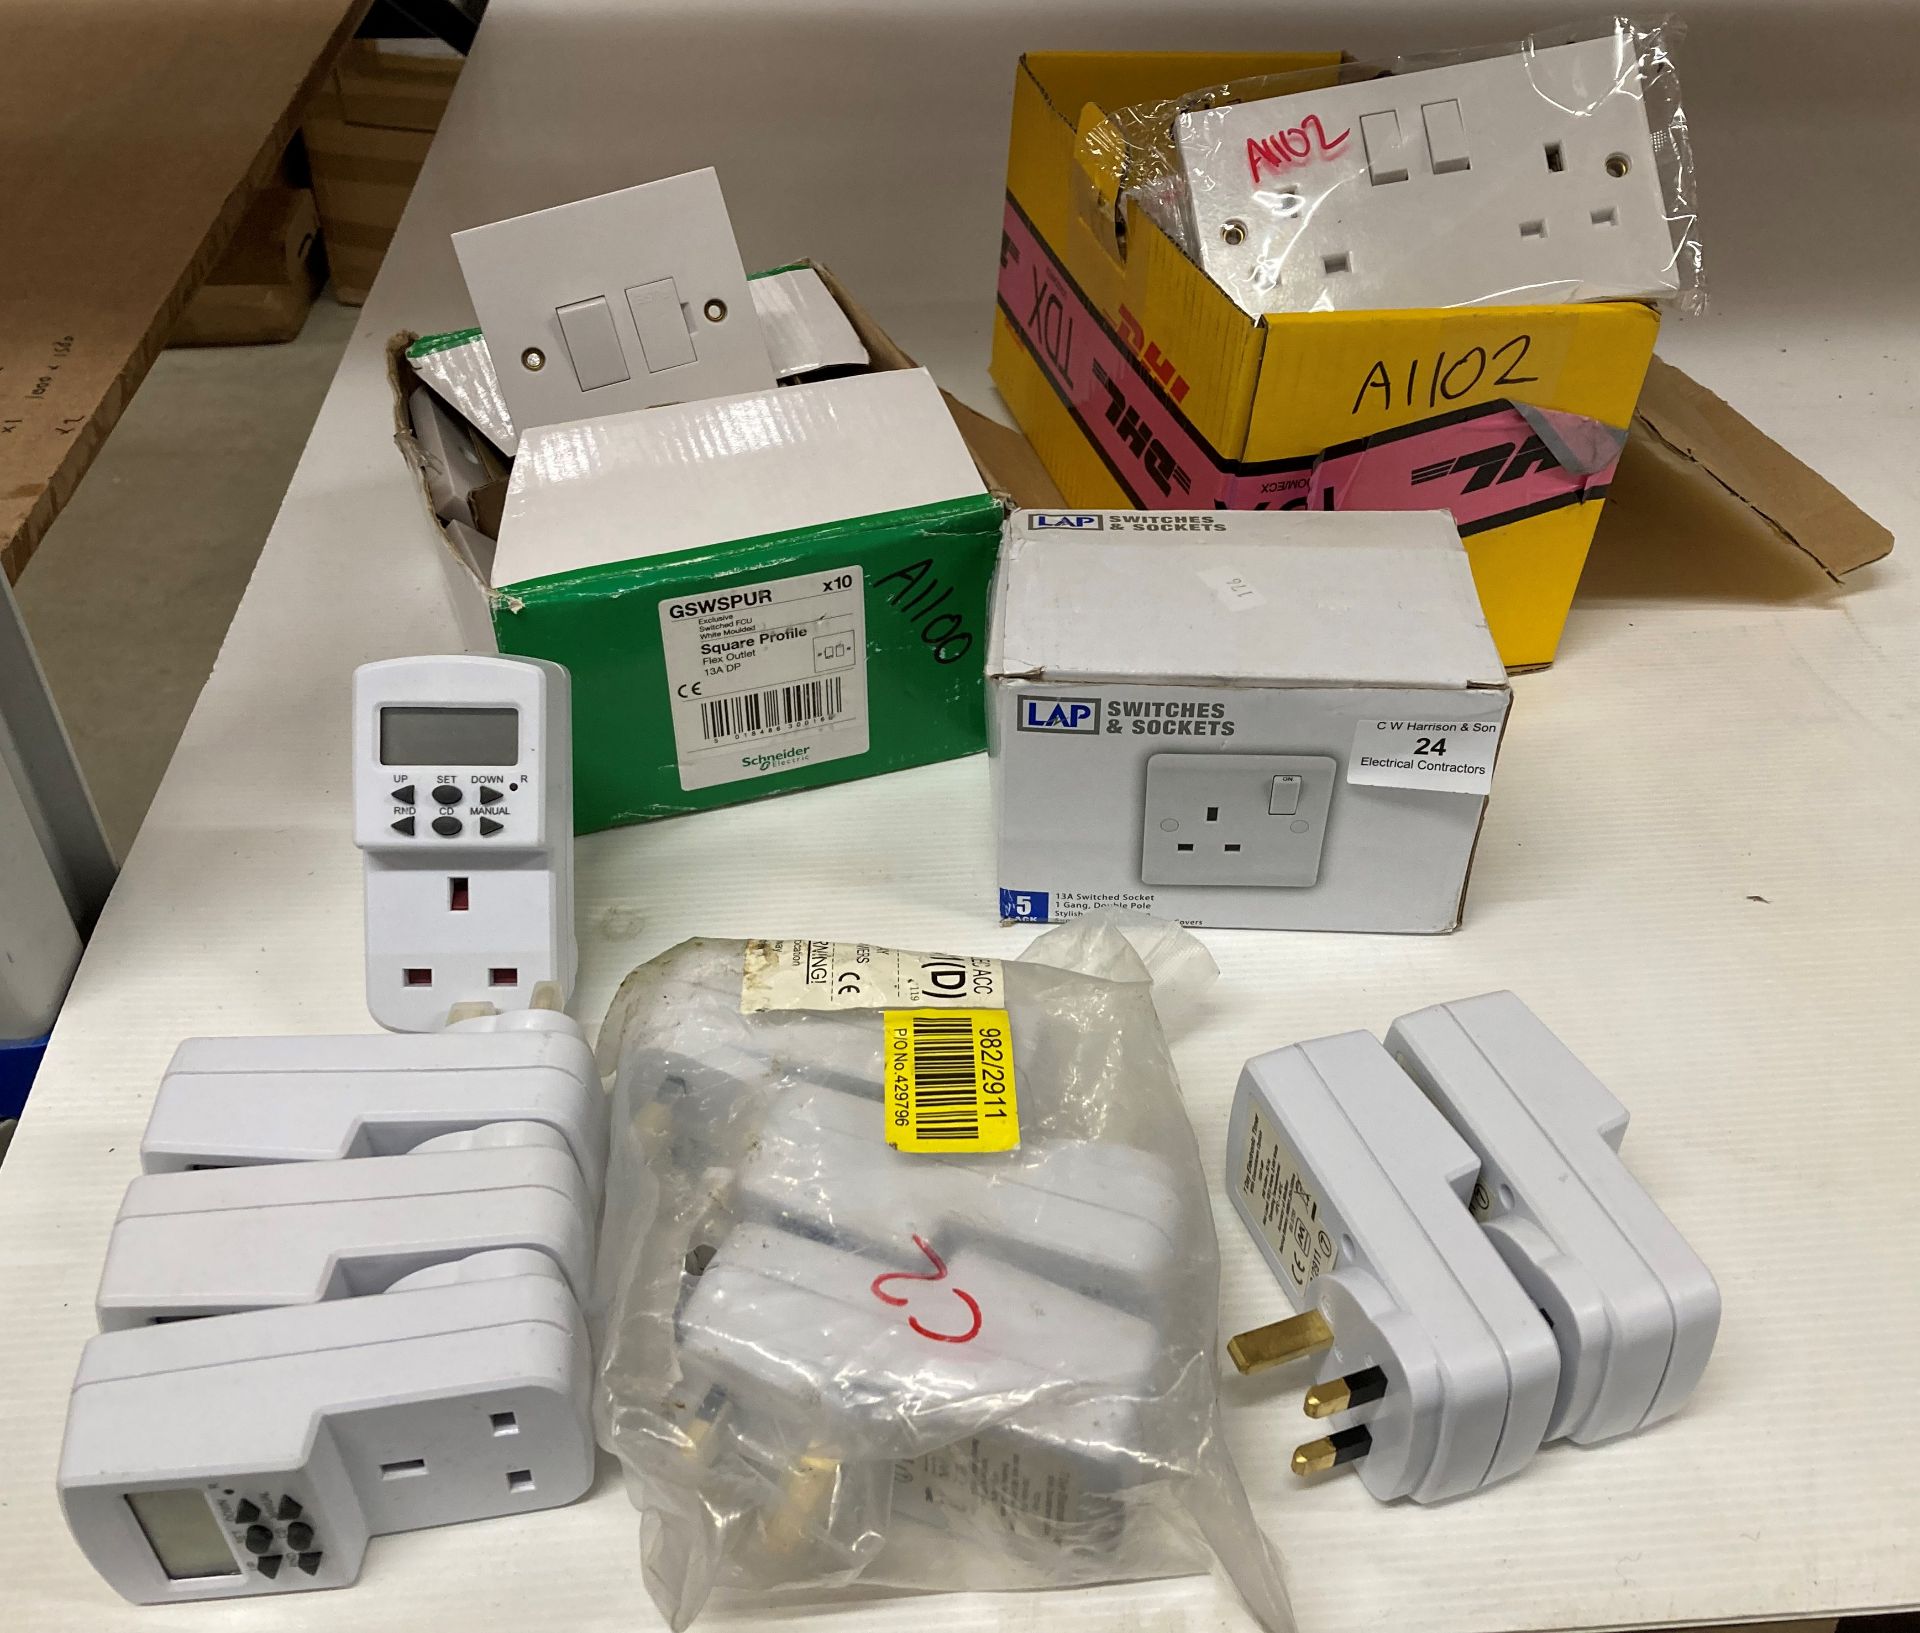 9 x 7 day electronic timers, 5 Lap single switch sockets,